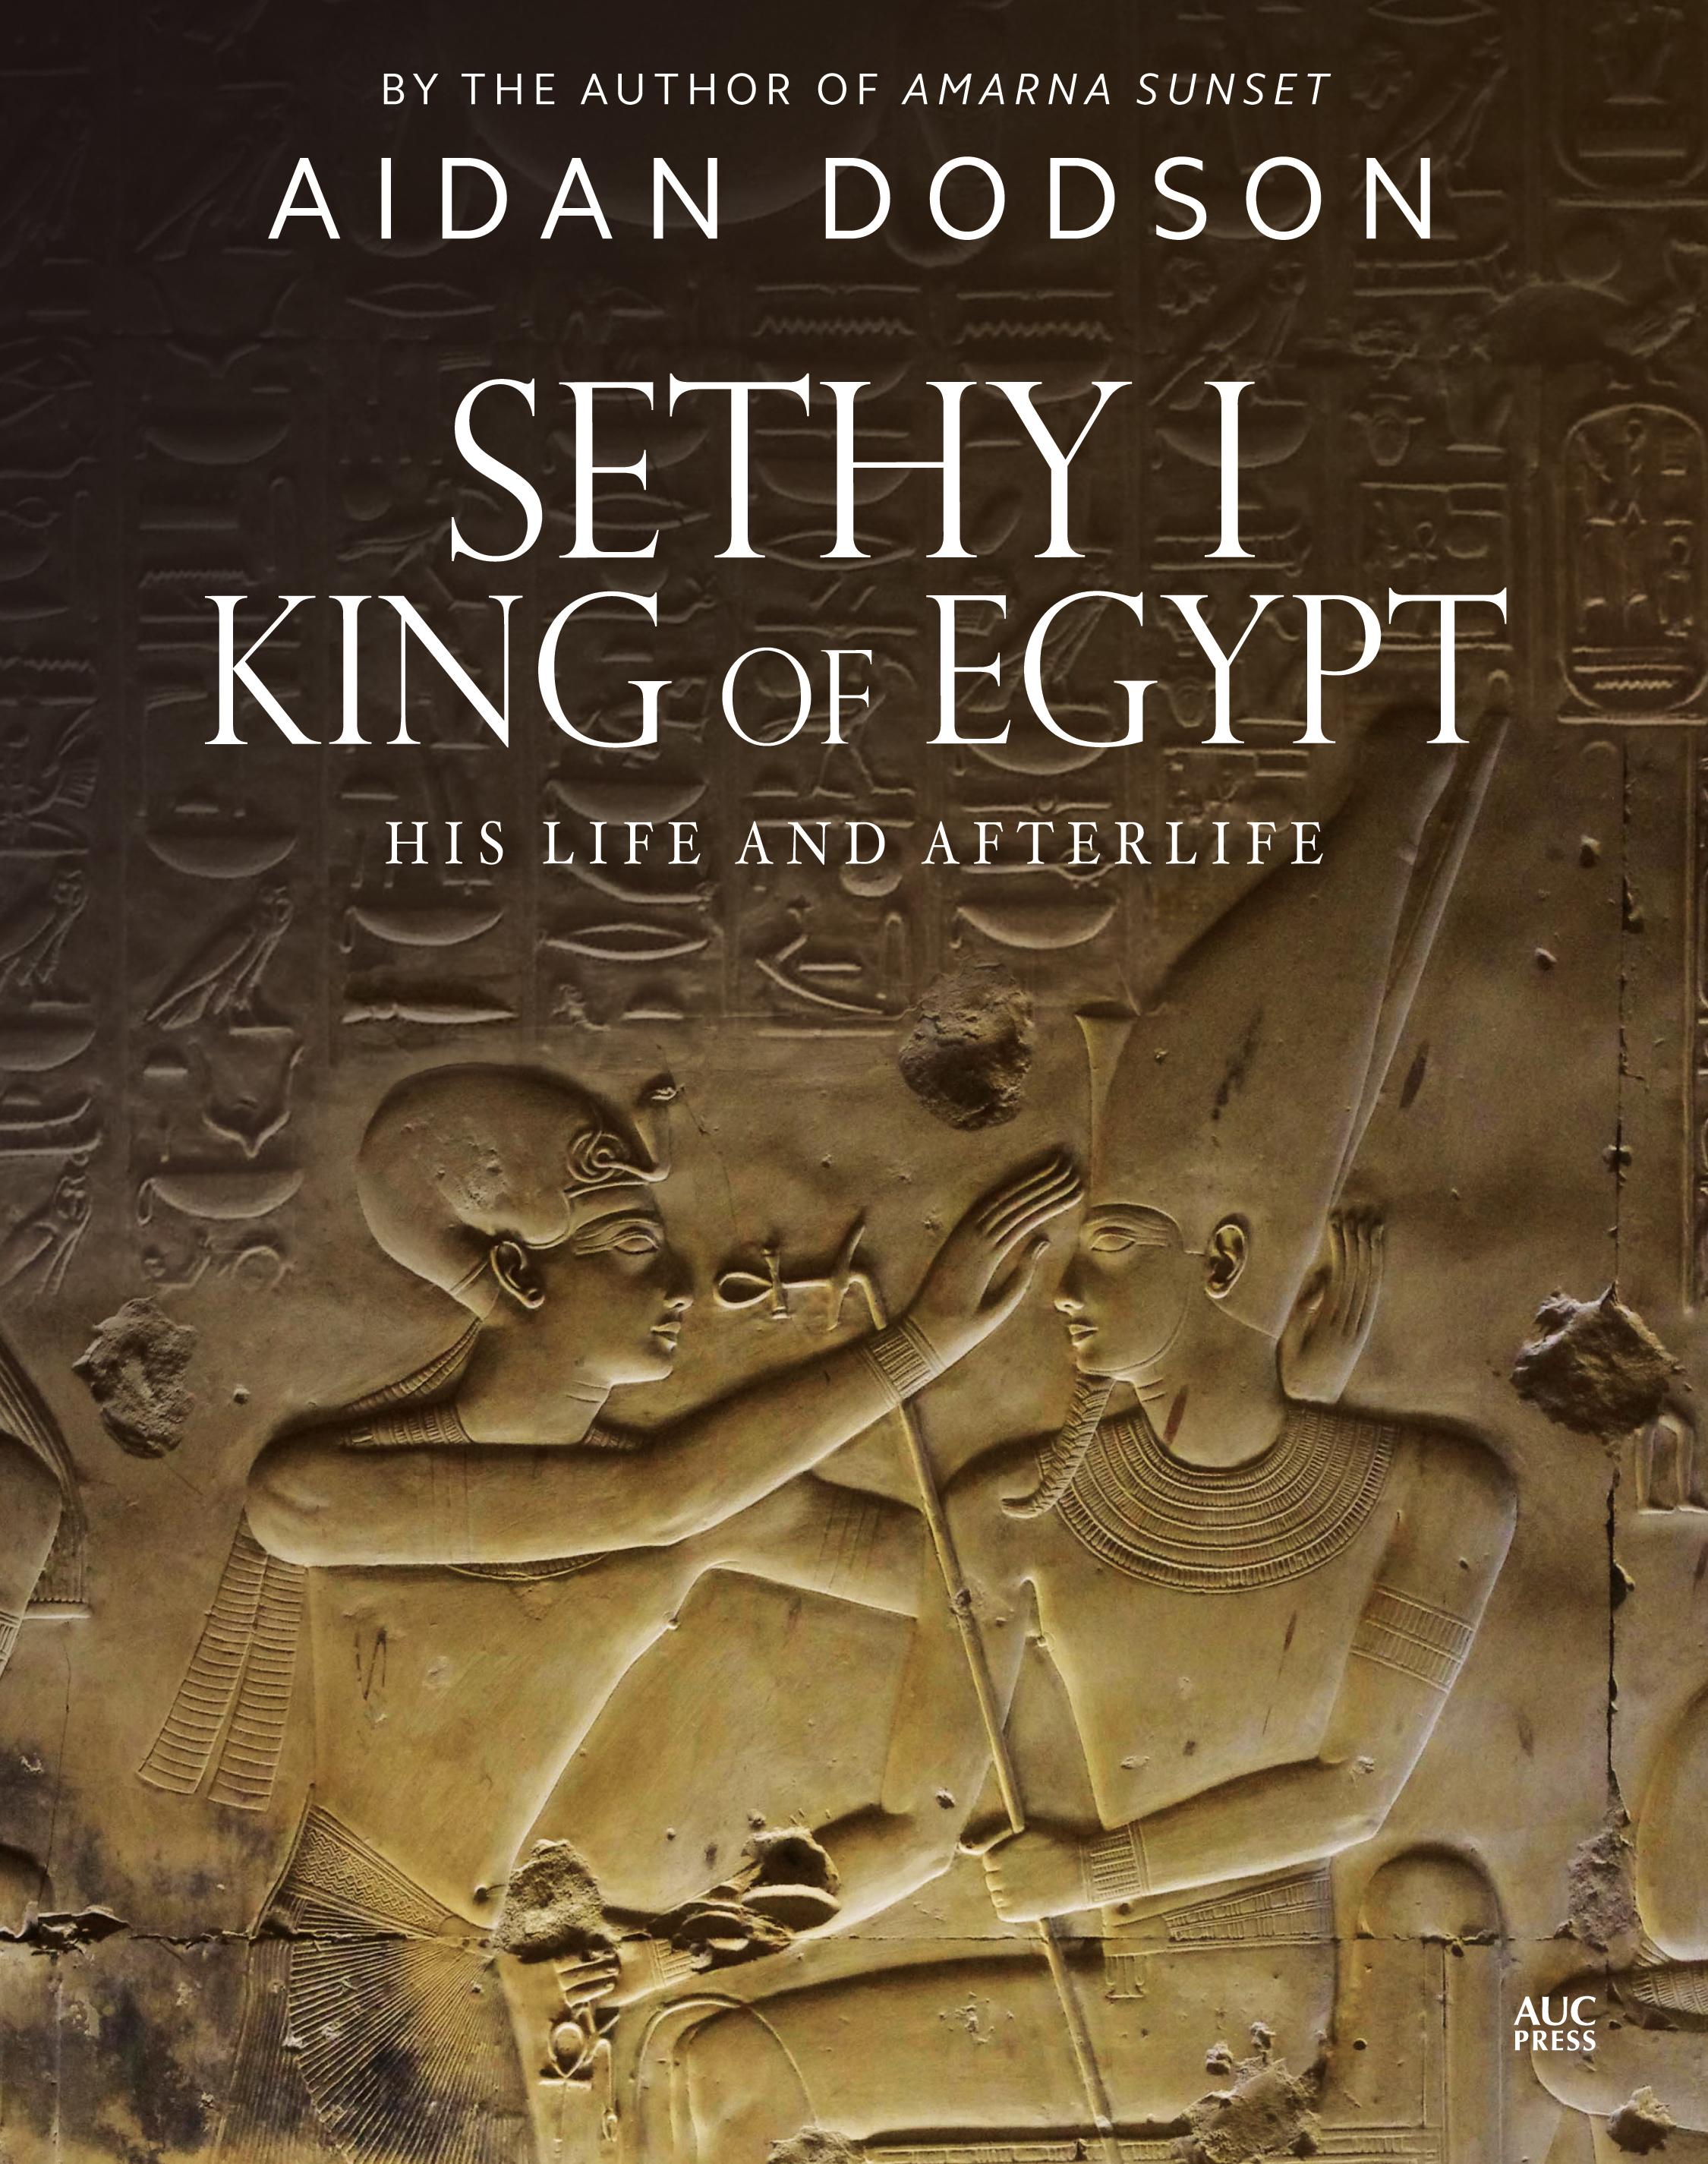 Sethy I, King of Egypt / His Life and Afterlife / Aidan Dodson / Buch / 2018 / The American University in Cairo Press / EAN 9789774168864 - Dodson, Aidan